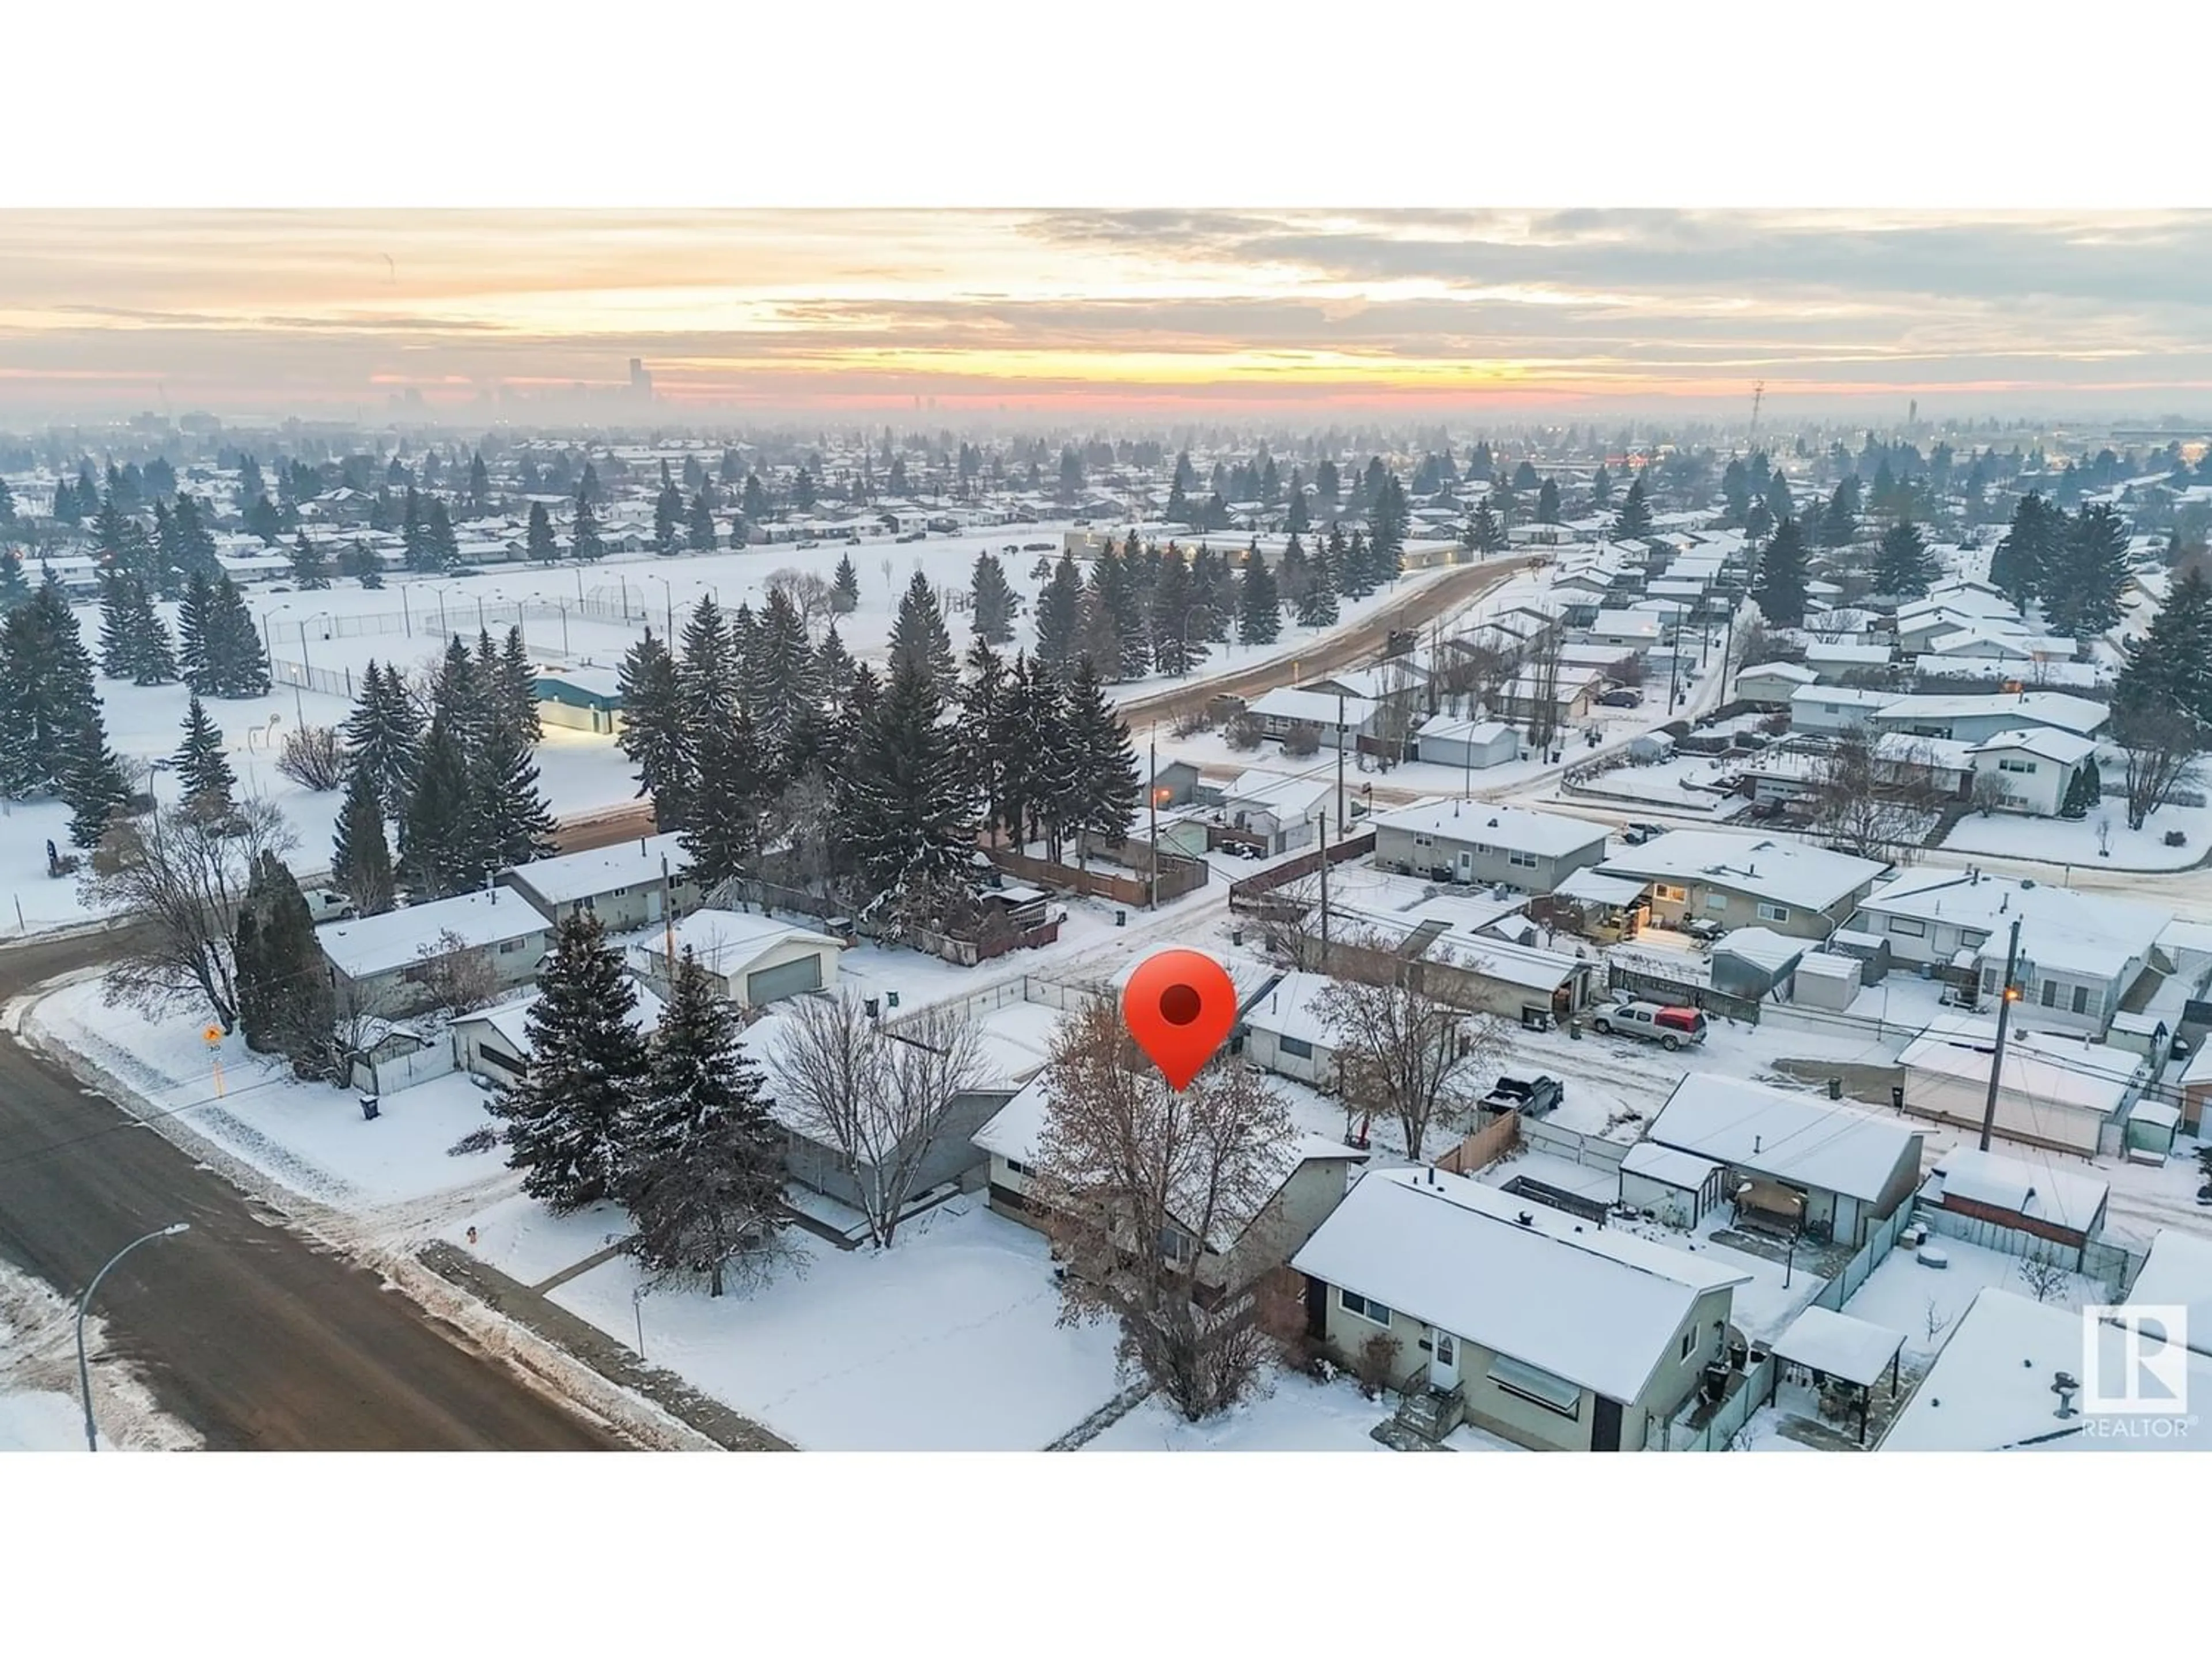 Street view for 14016 58 ST NW NW, Edmonton Alberta T5A1N4